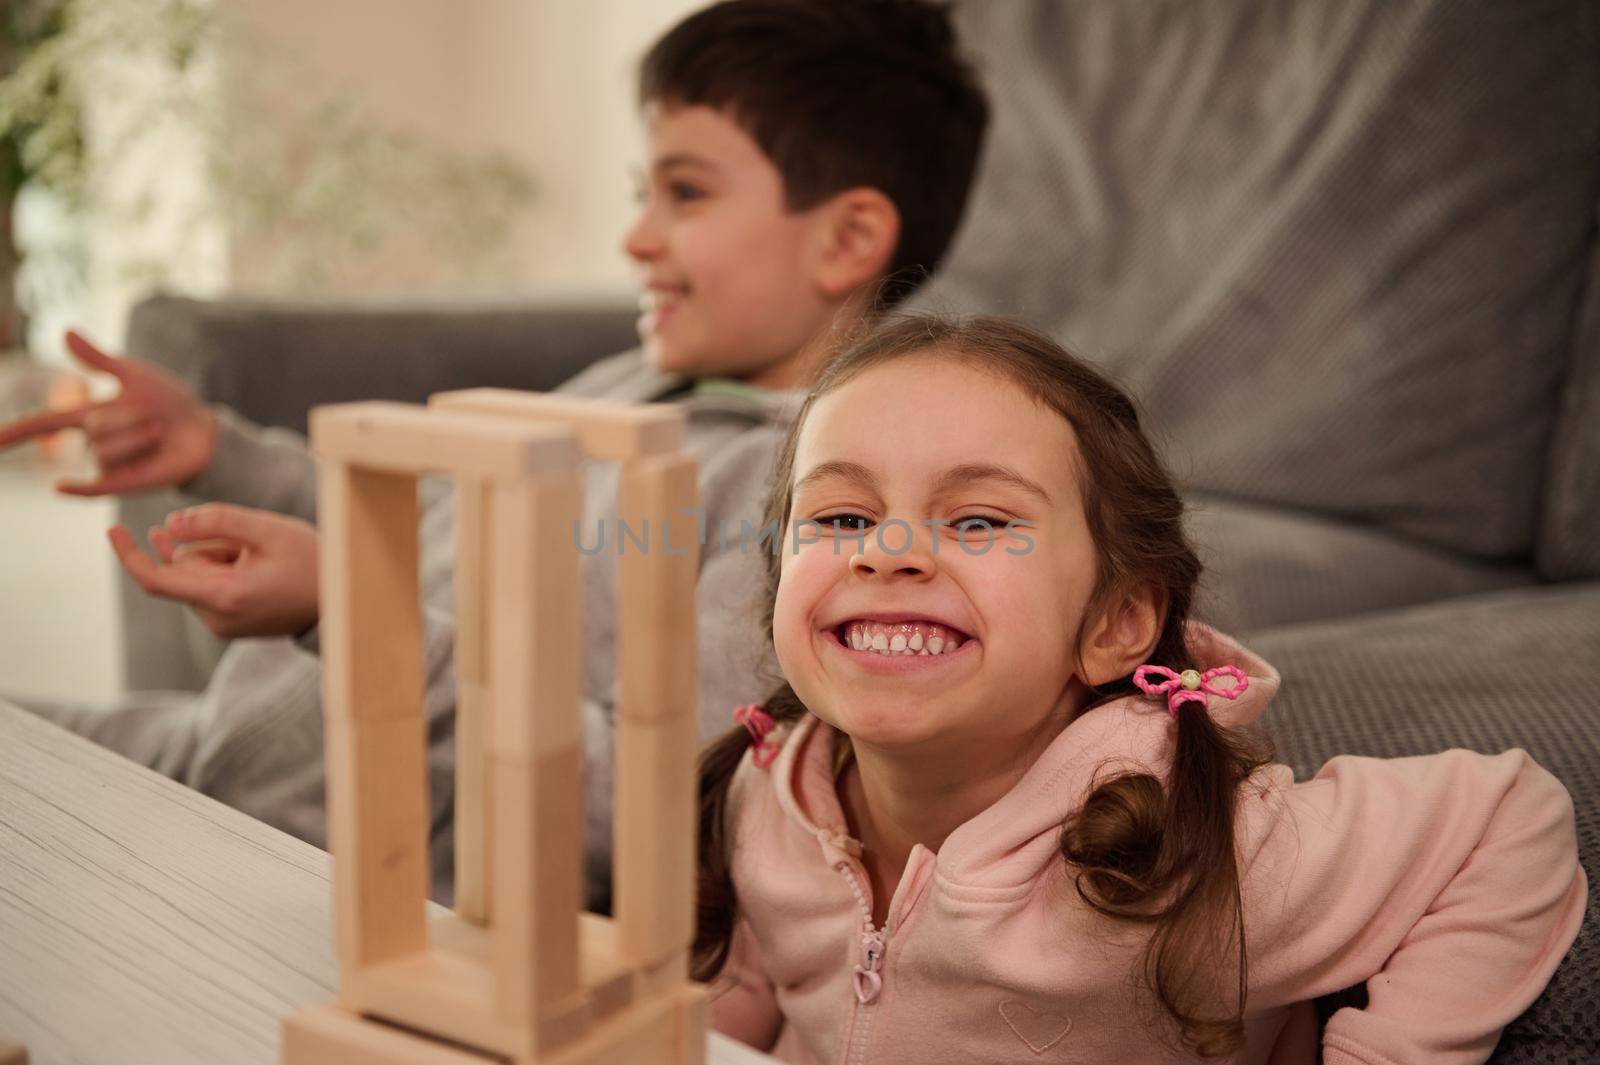 Adorable child, beautiful little girl in pink sweatshirt plays board game with her brother, builds wooden structures from wooden bricks and blocks, smiles toothy smile, looking at camera